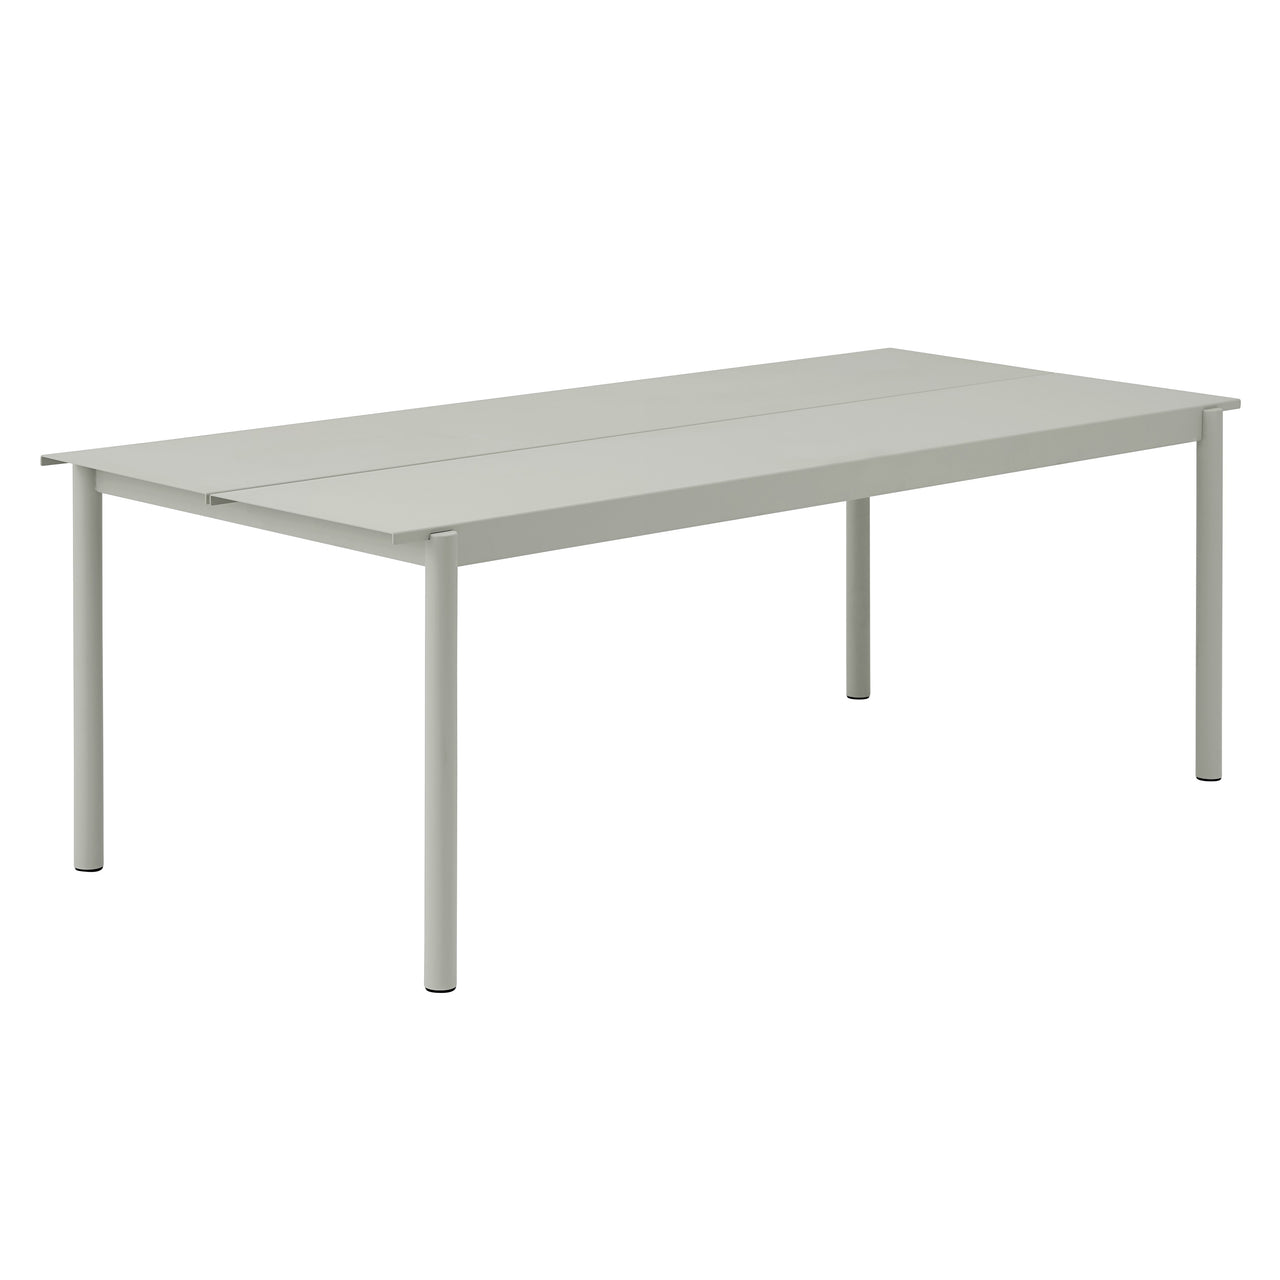 Linear Steel Table: Large - 86.6